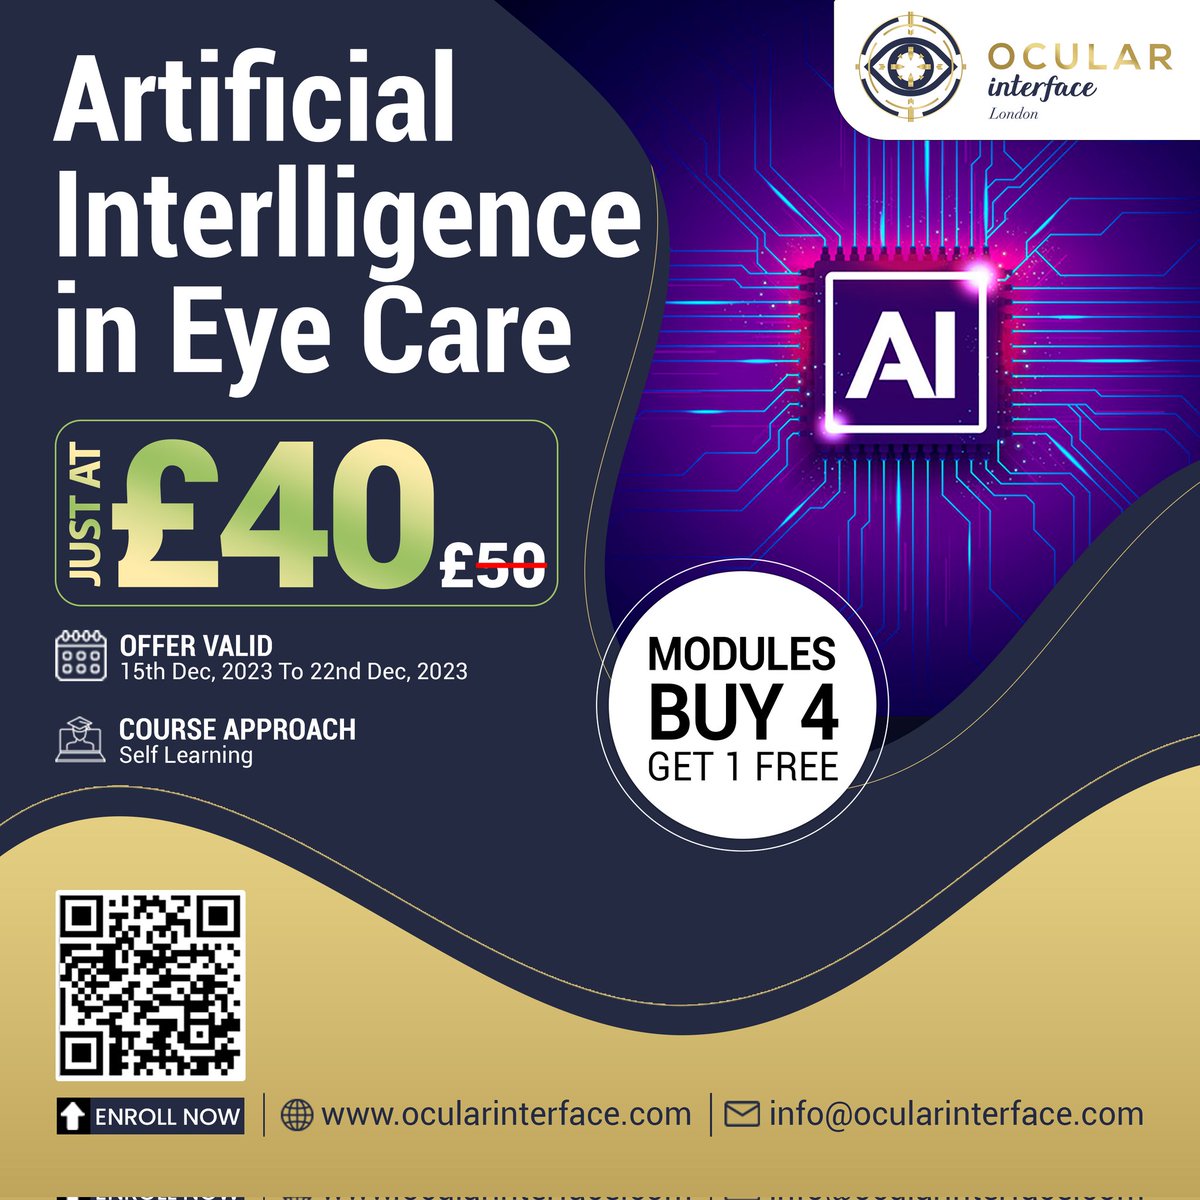 🌟 Dive into the revolutionary world of AI with our exclusive offer! Enrol in our 'Artificial Intelligence in Eye Care' 

✨ REGISTER: ocularinterface.com/courses/ 

#ocularinterface #AIinEyecare #SpecialOffer #TechinMedicine #LearnAi #SelfPacedLearning #AIinEyecare #OcularInterface